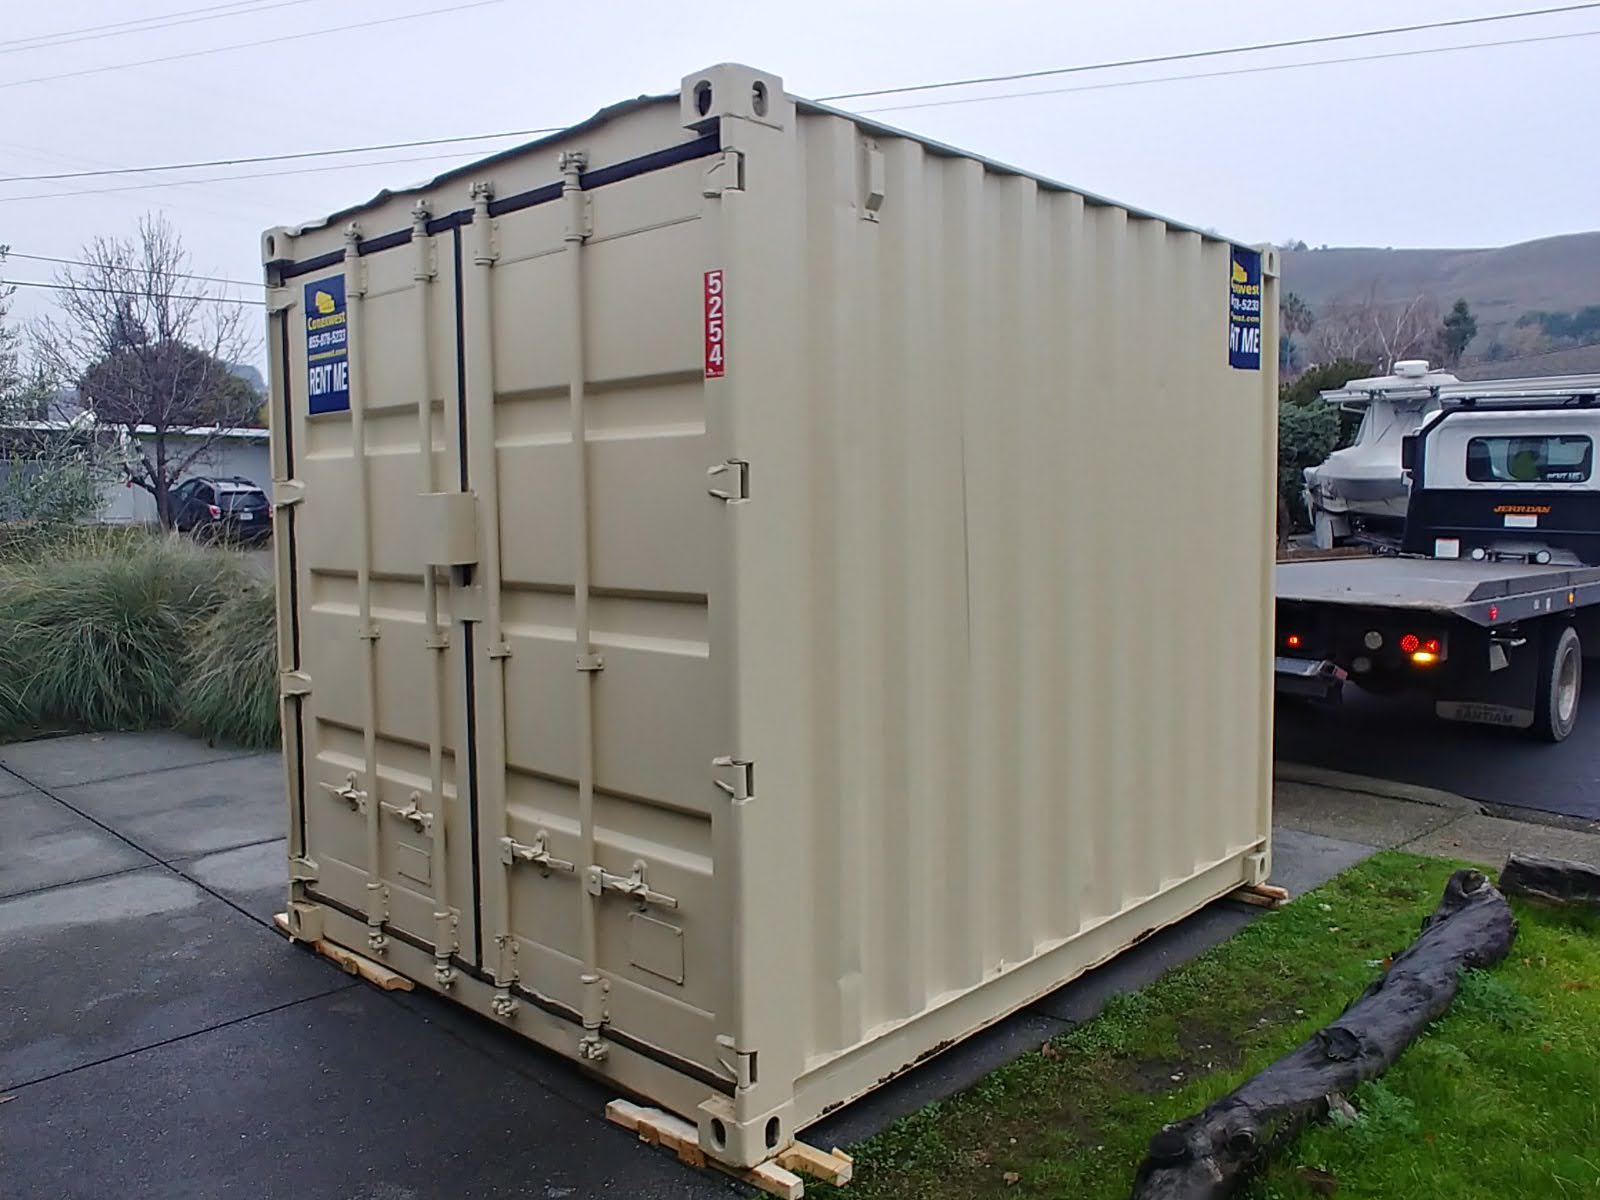 10 foot Shipping Container, Rent or Buy